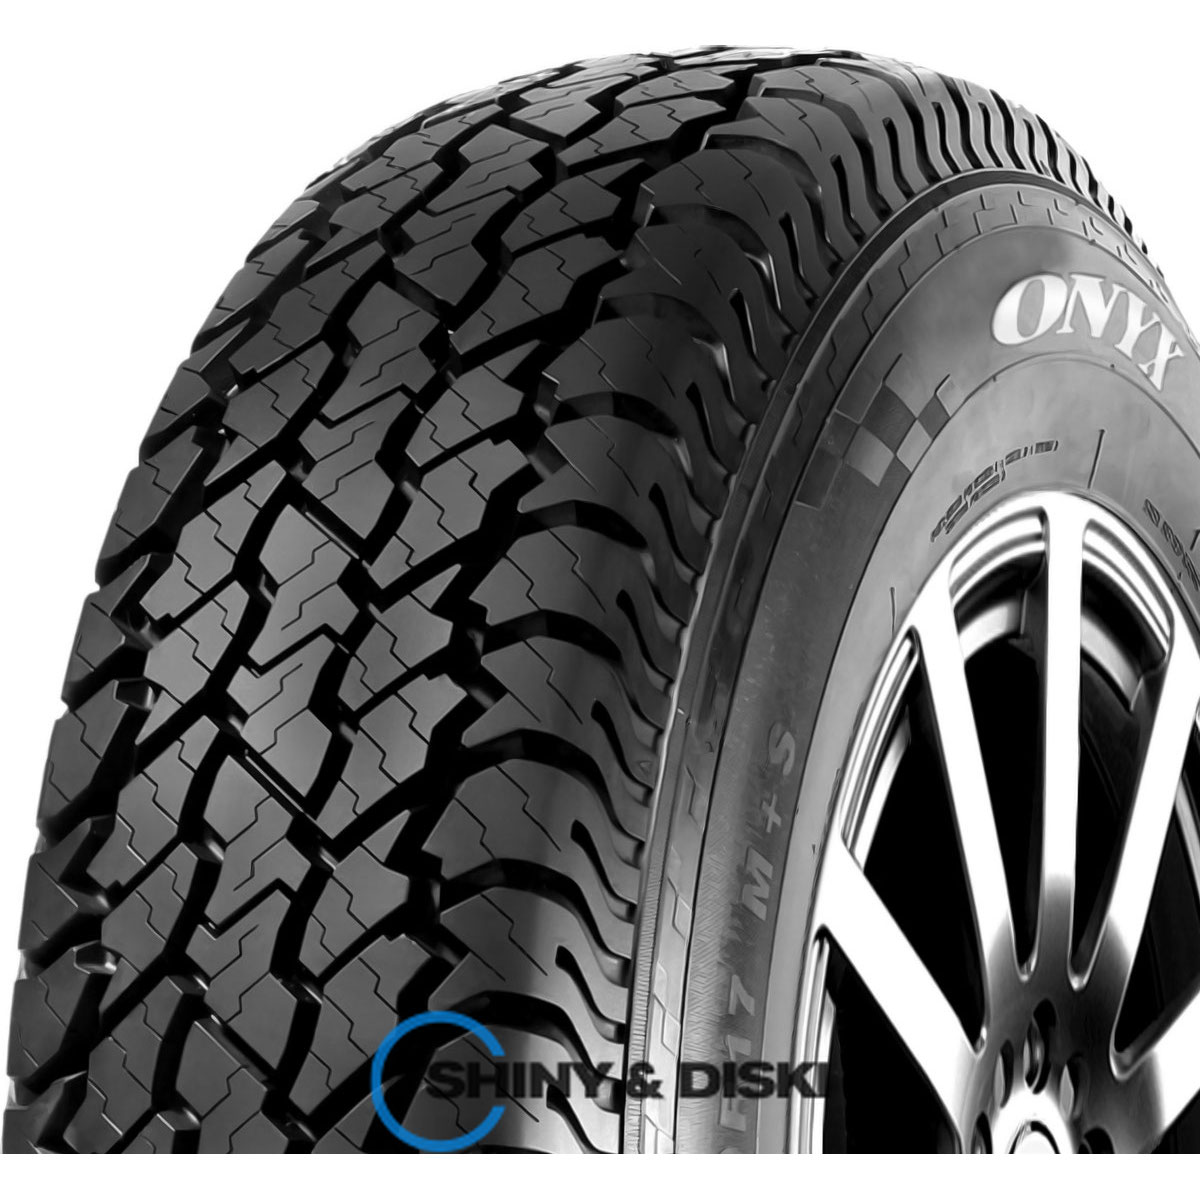 покрышки onyx ny-at187 265/65 r17 112t